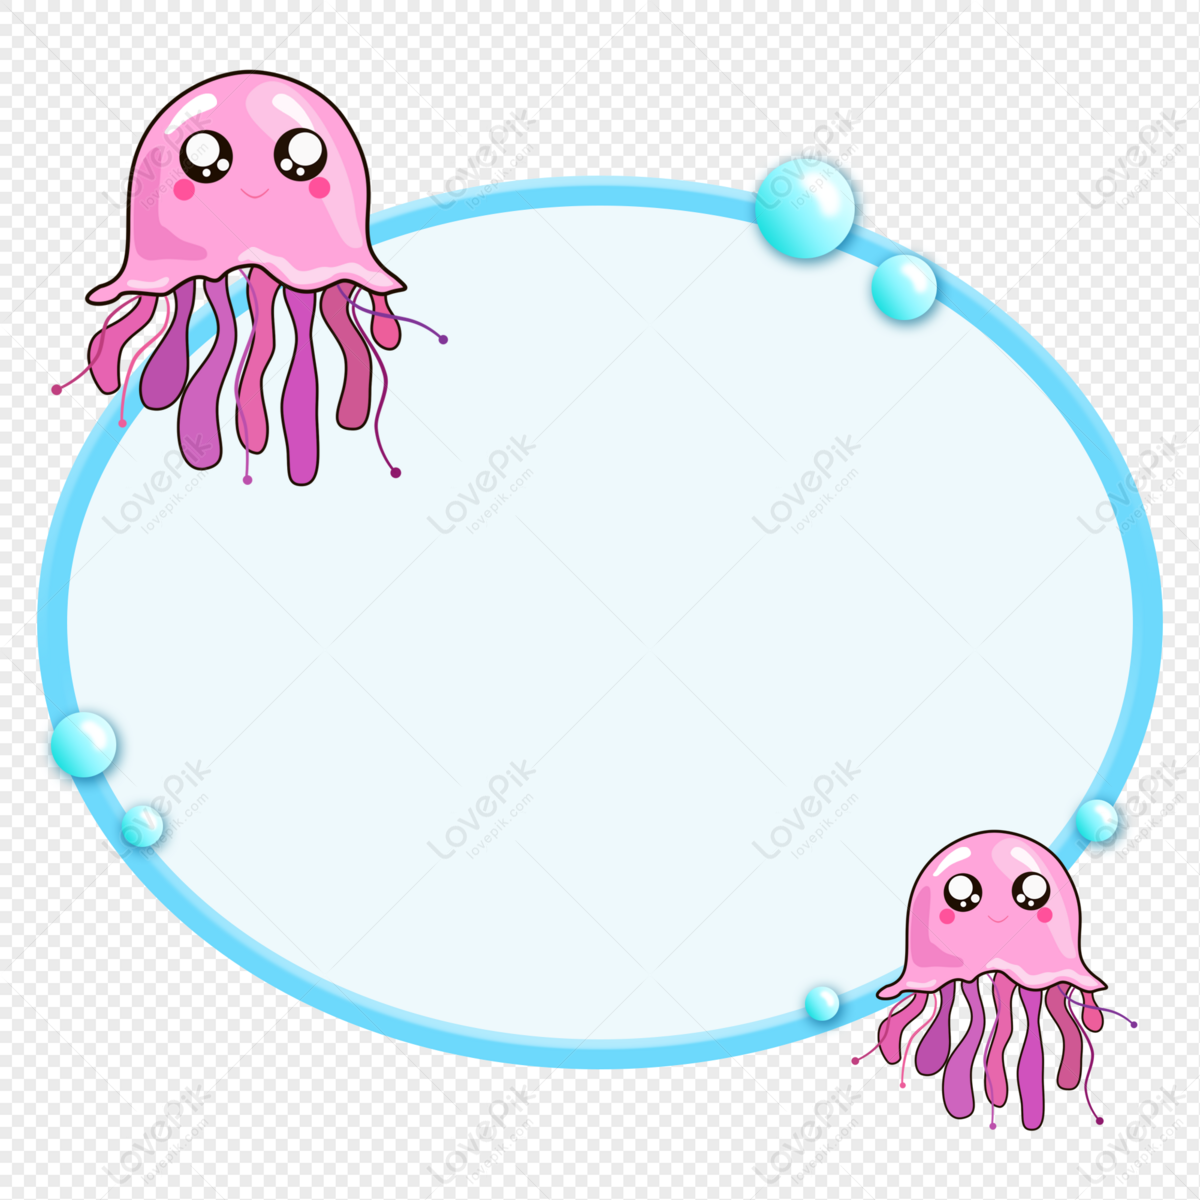 Border Small Animal Marine Life Border Small Jellyfish Free PNG And Clipart  Image For Free Download - Lovepik | 401514829